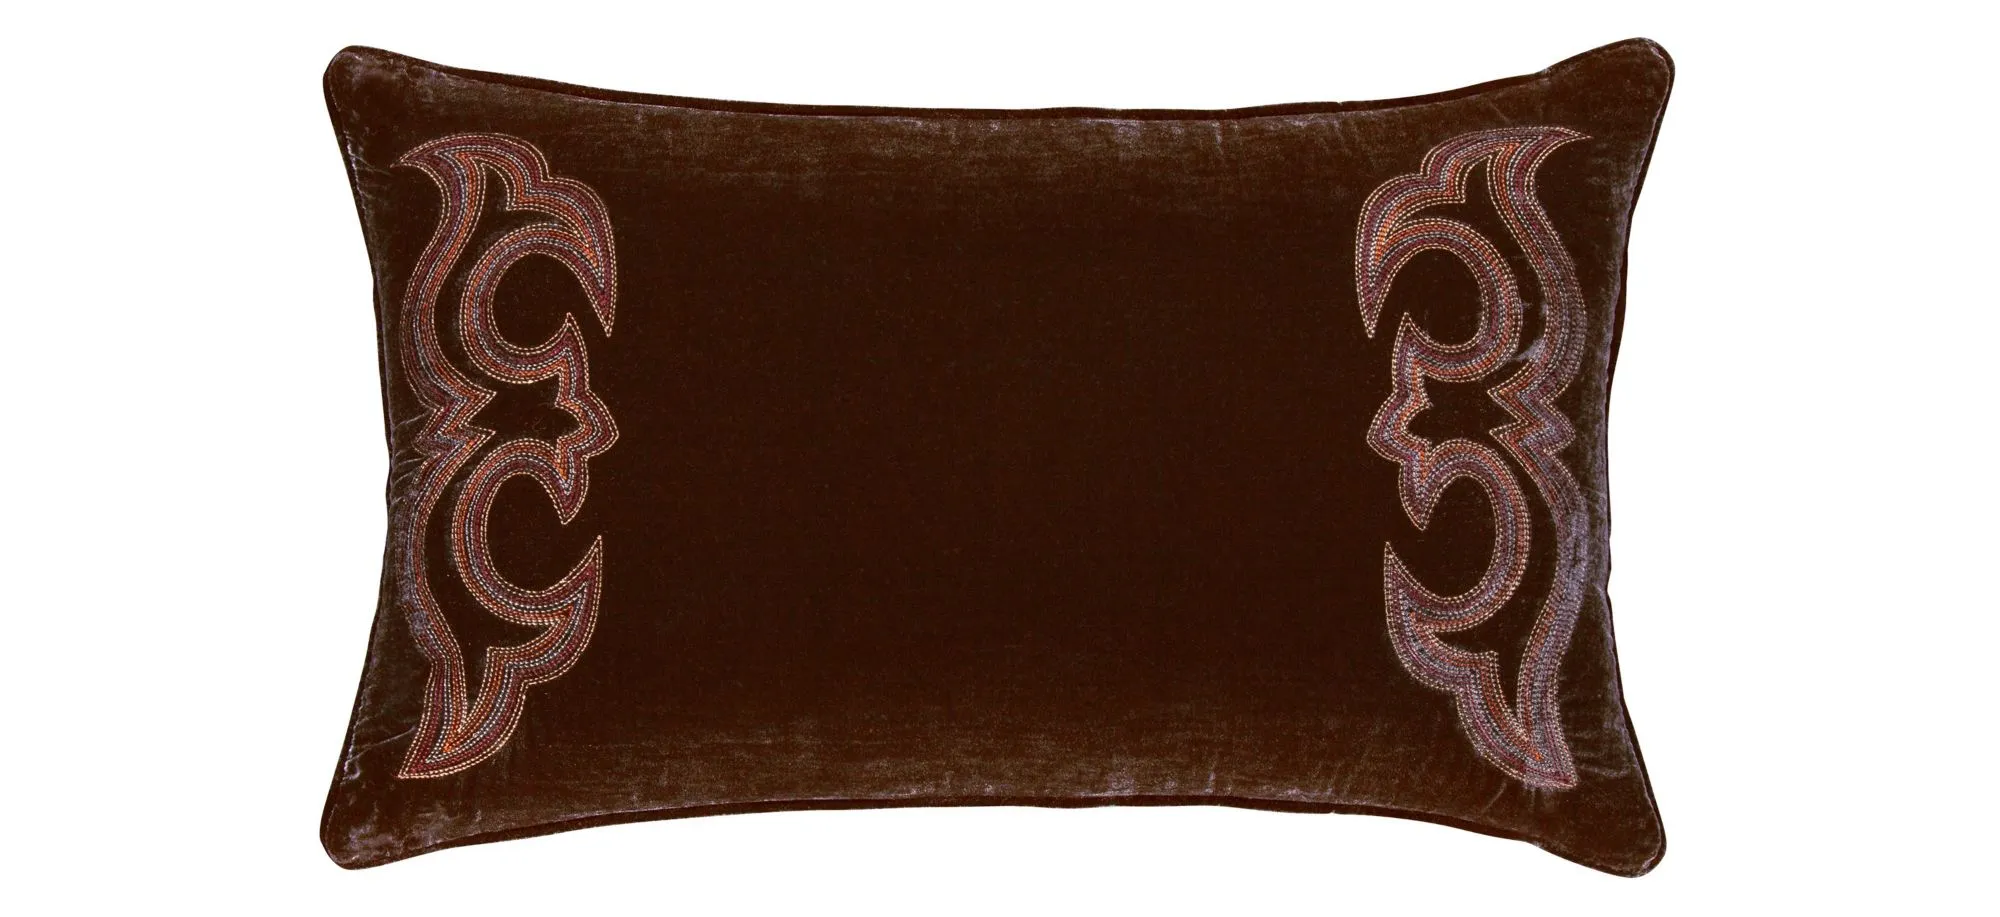 Trendsetter Lumbar Pillow in Copper Brown by HiEnd Accents